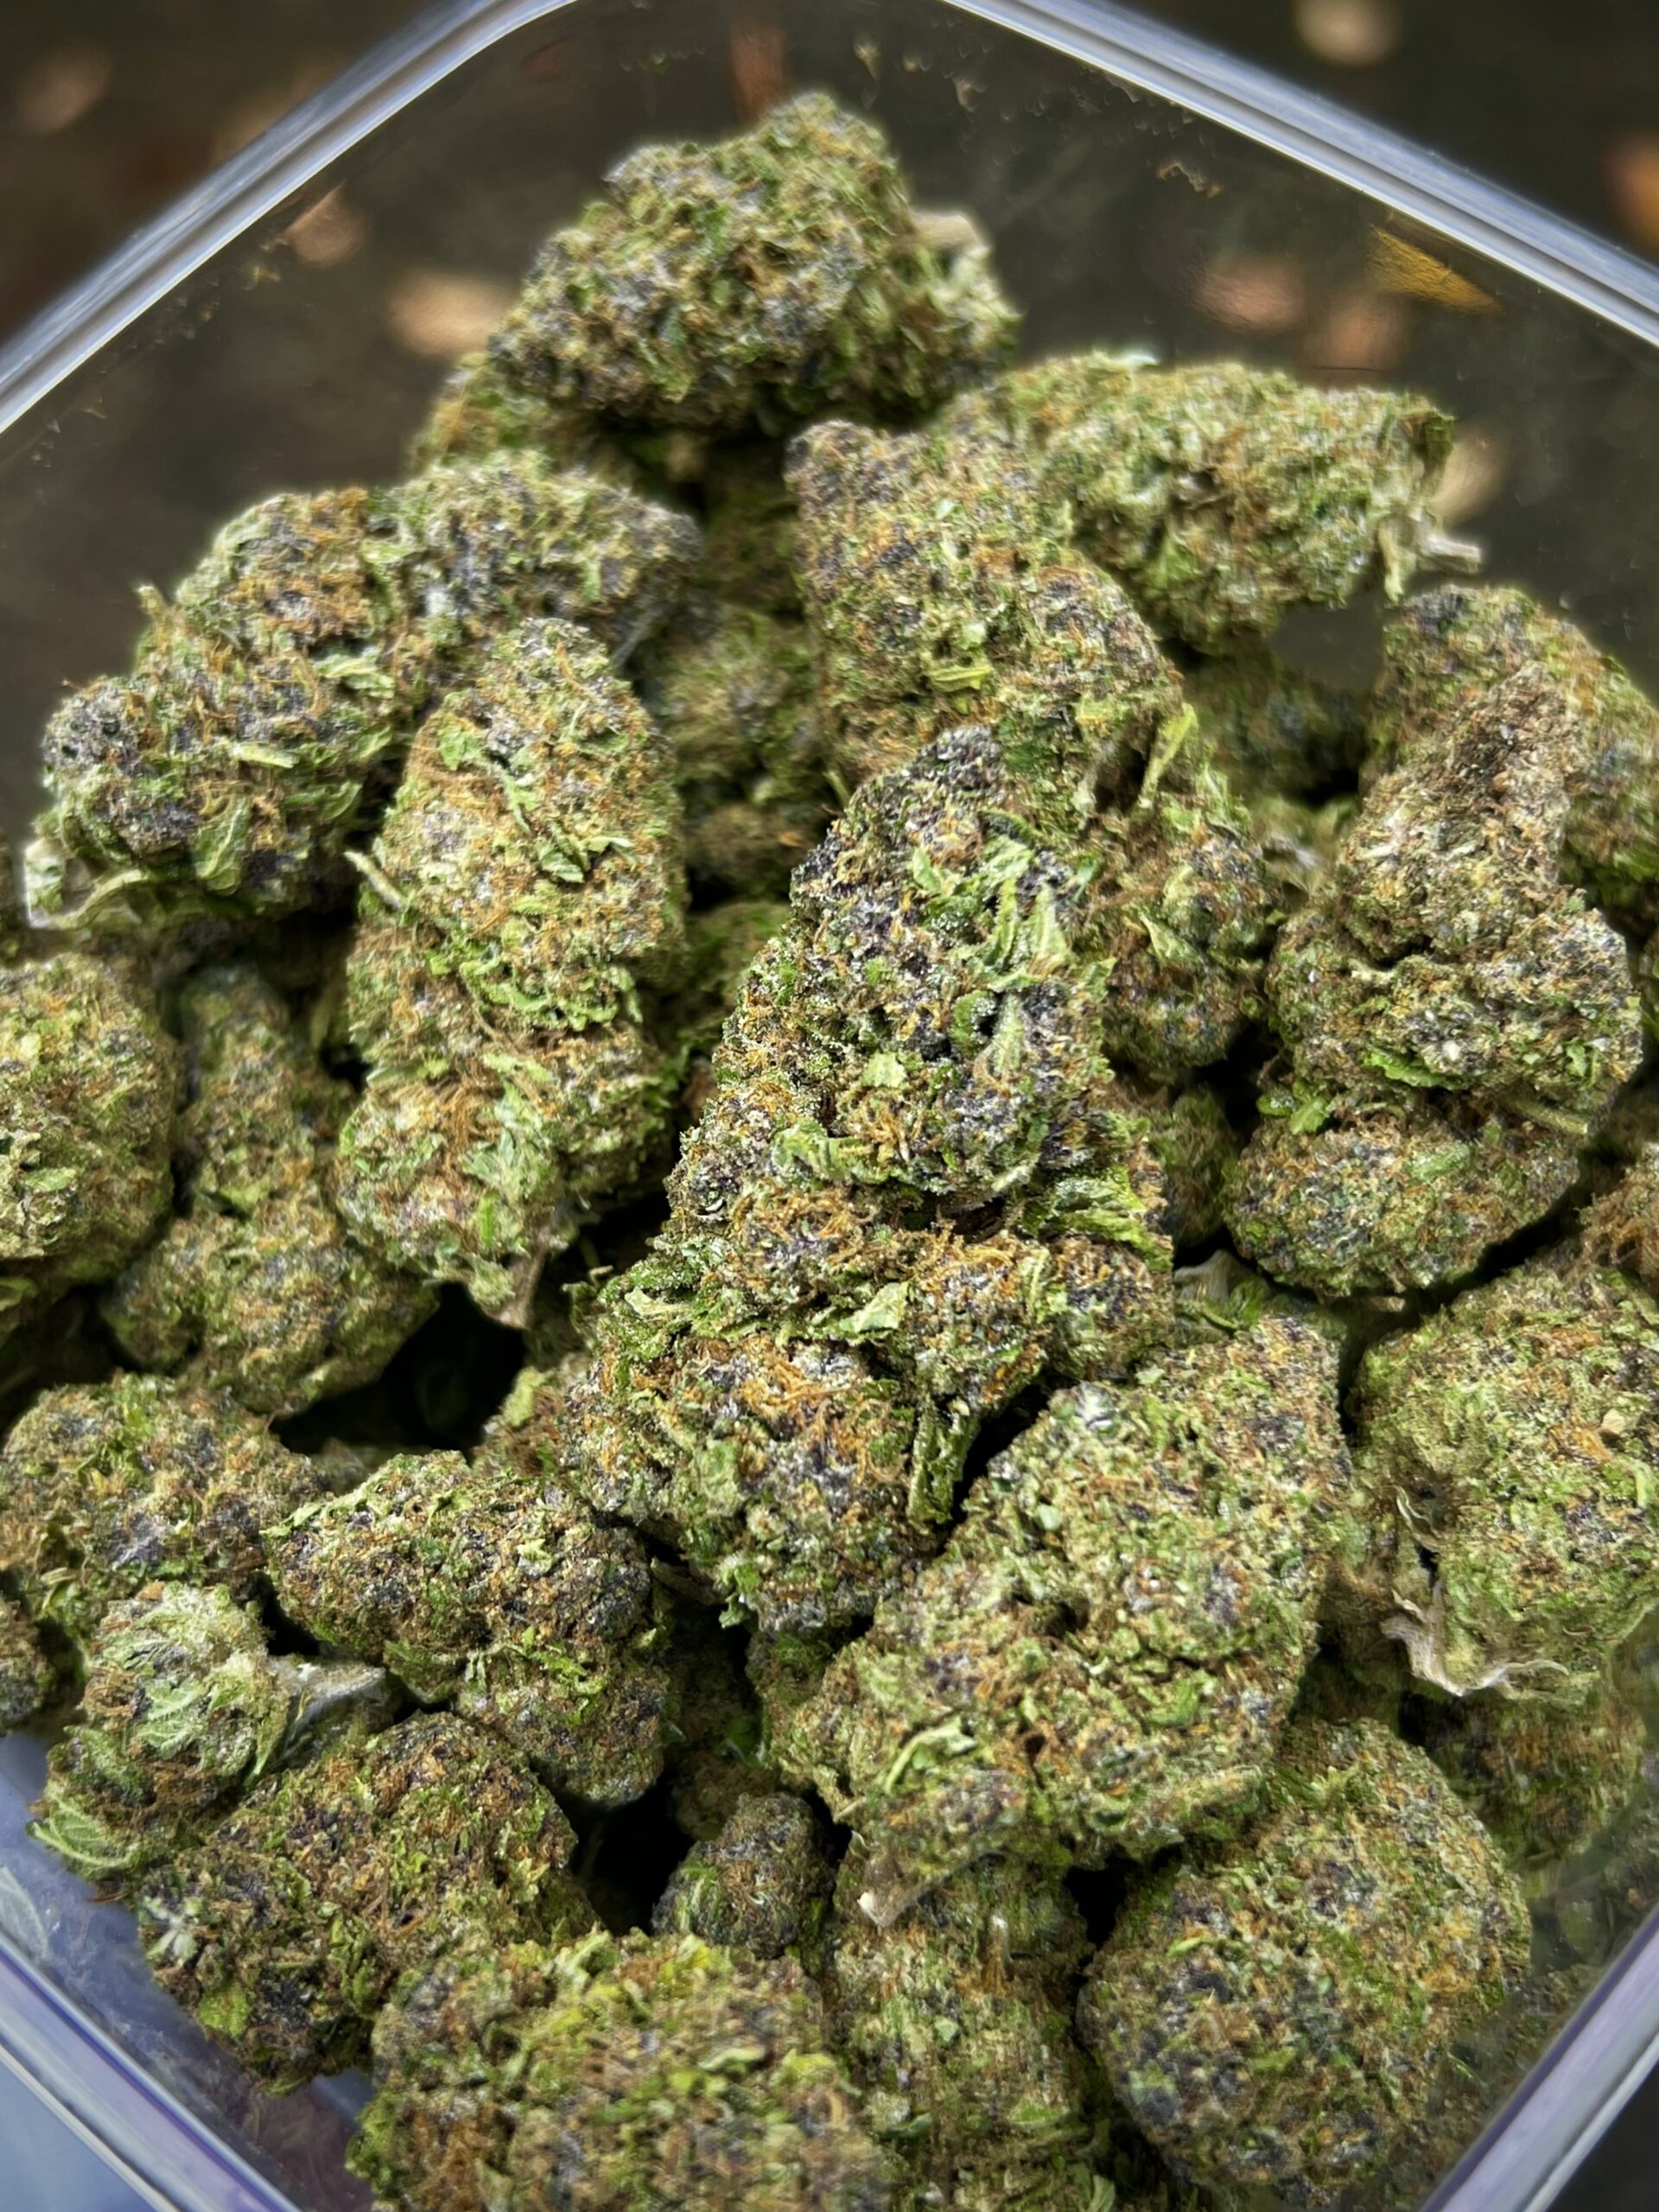 Oregon Roots Incredible flower only $70 an ounce!